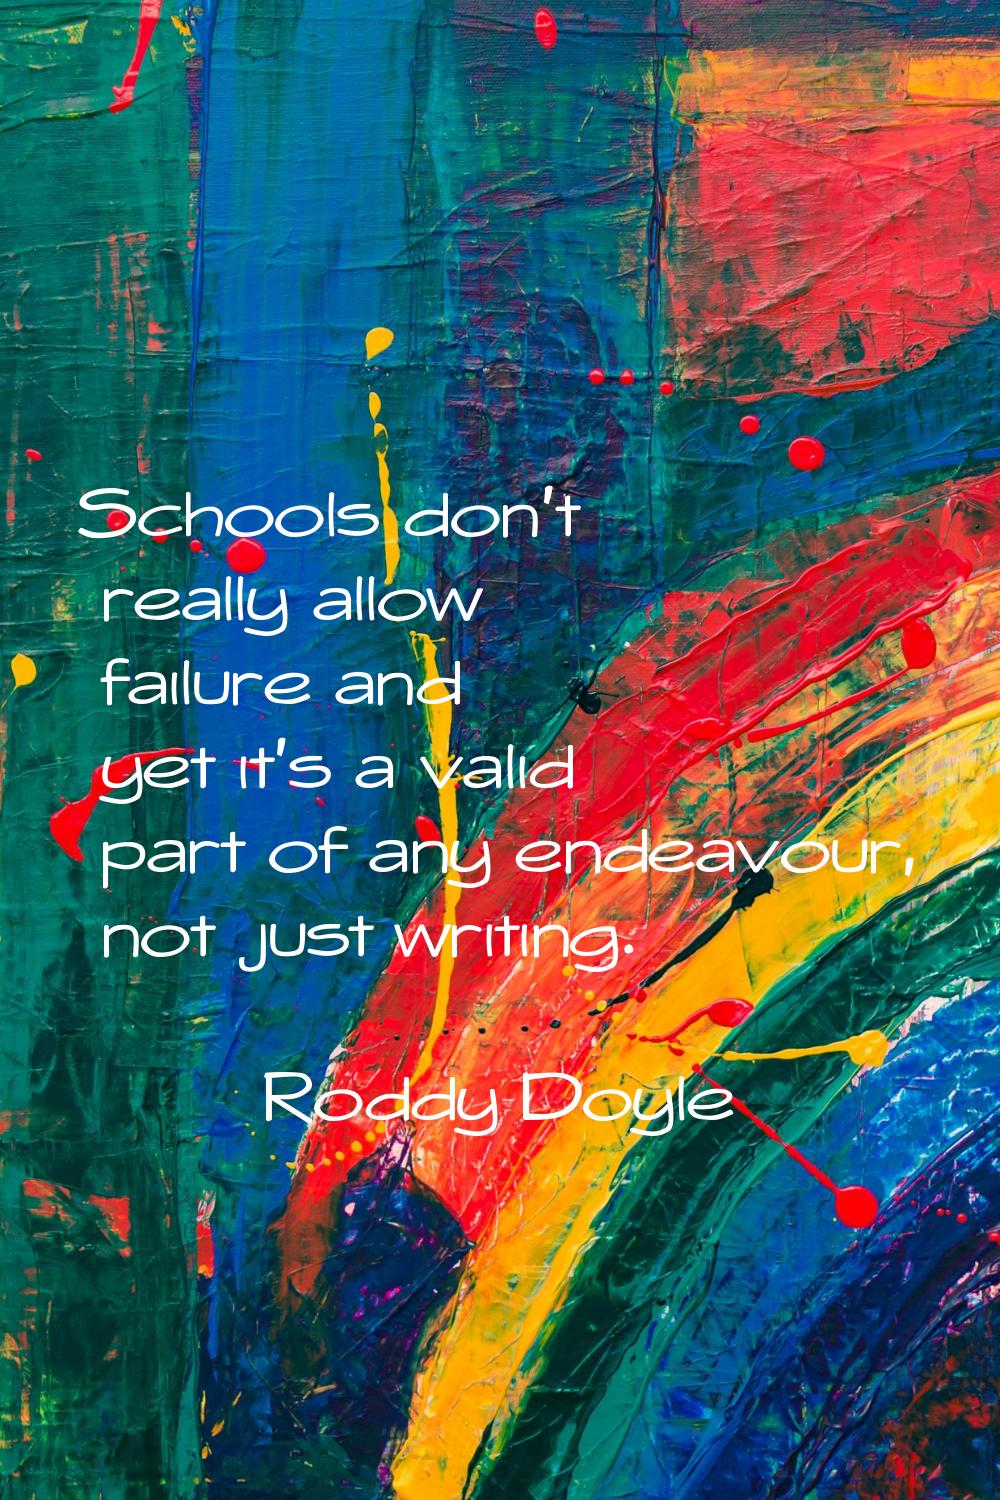 Schools don't really allow failure and yet it's a valid part of any endeavour, not just writing.